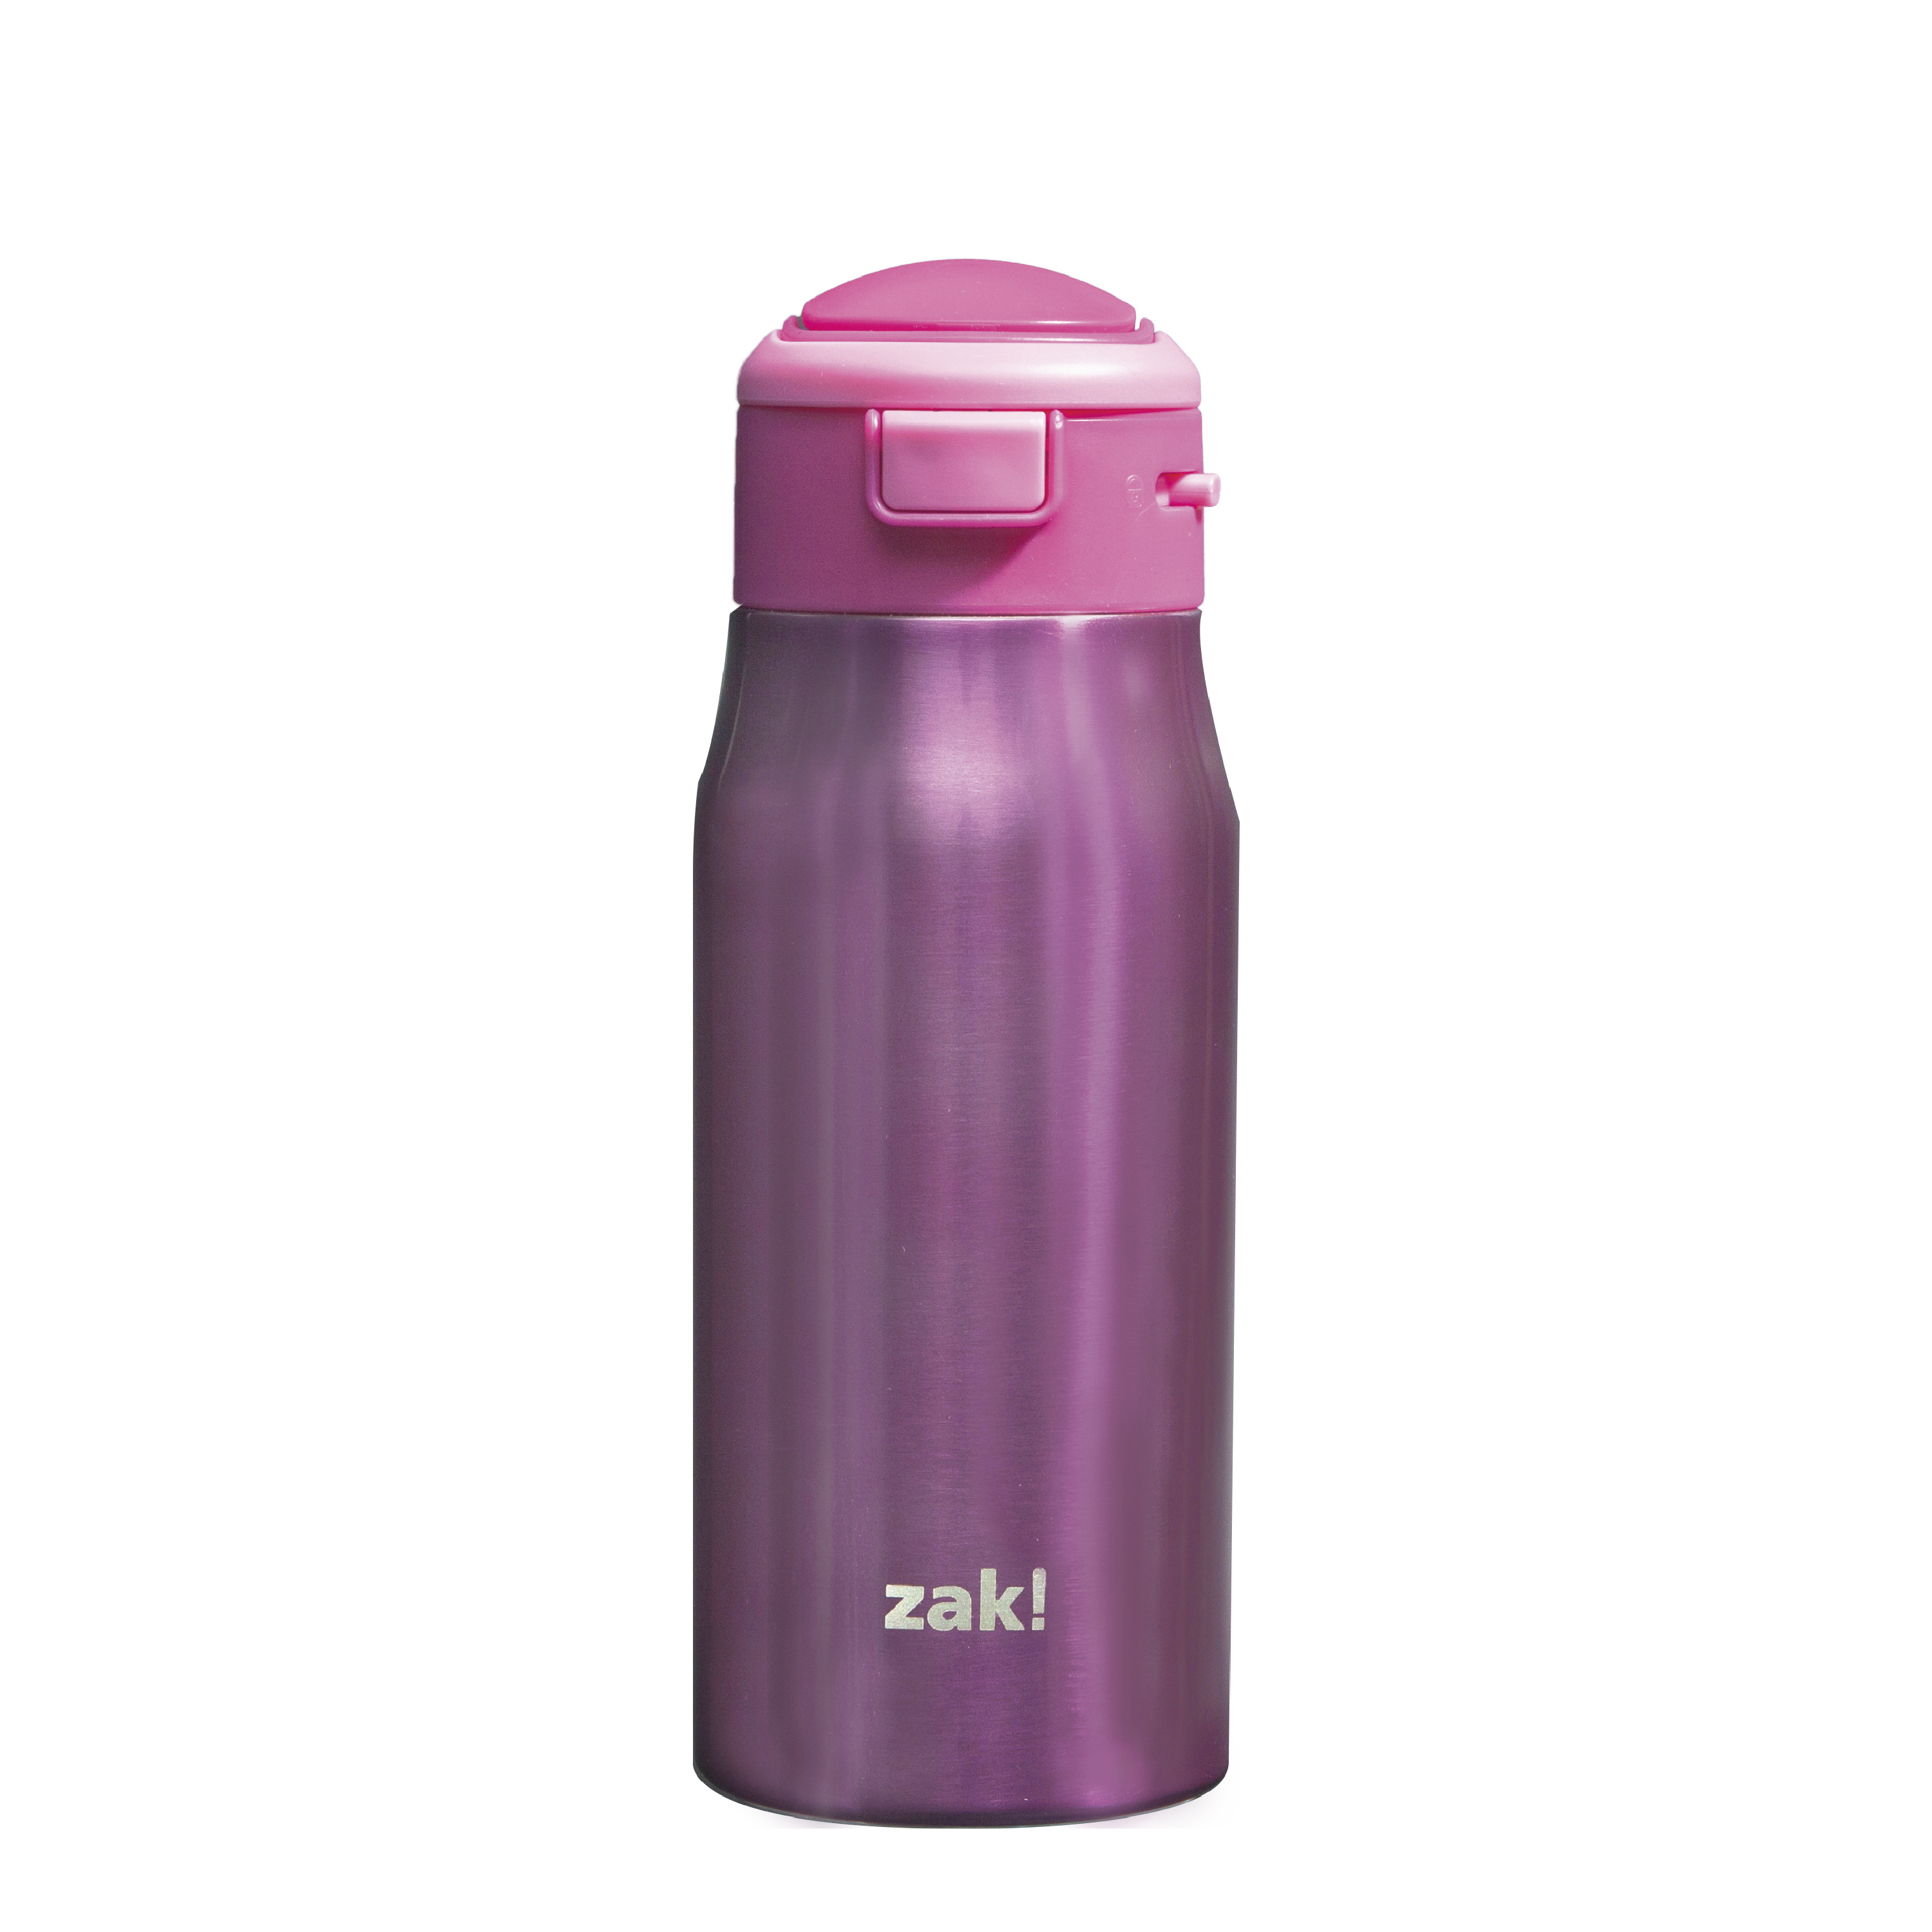 Mesa 13.5 ounce Double Wall Insulated Stainless Steel Water Bottle, Pink slideshow image 1